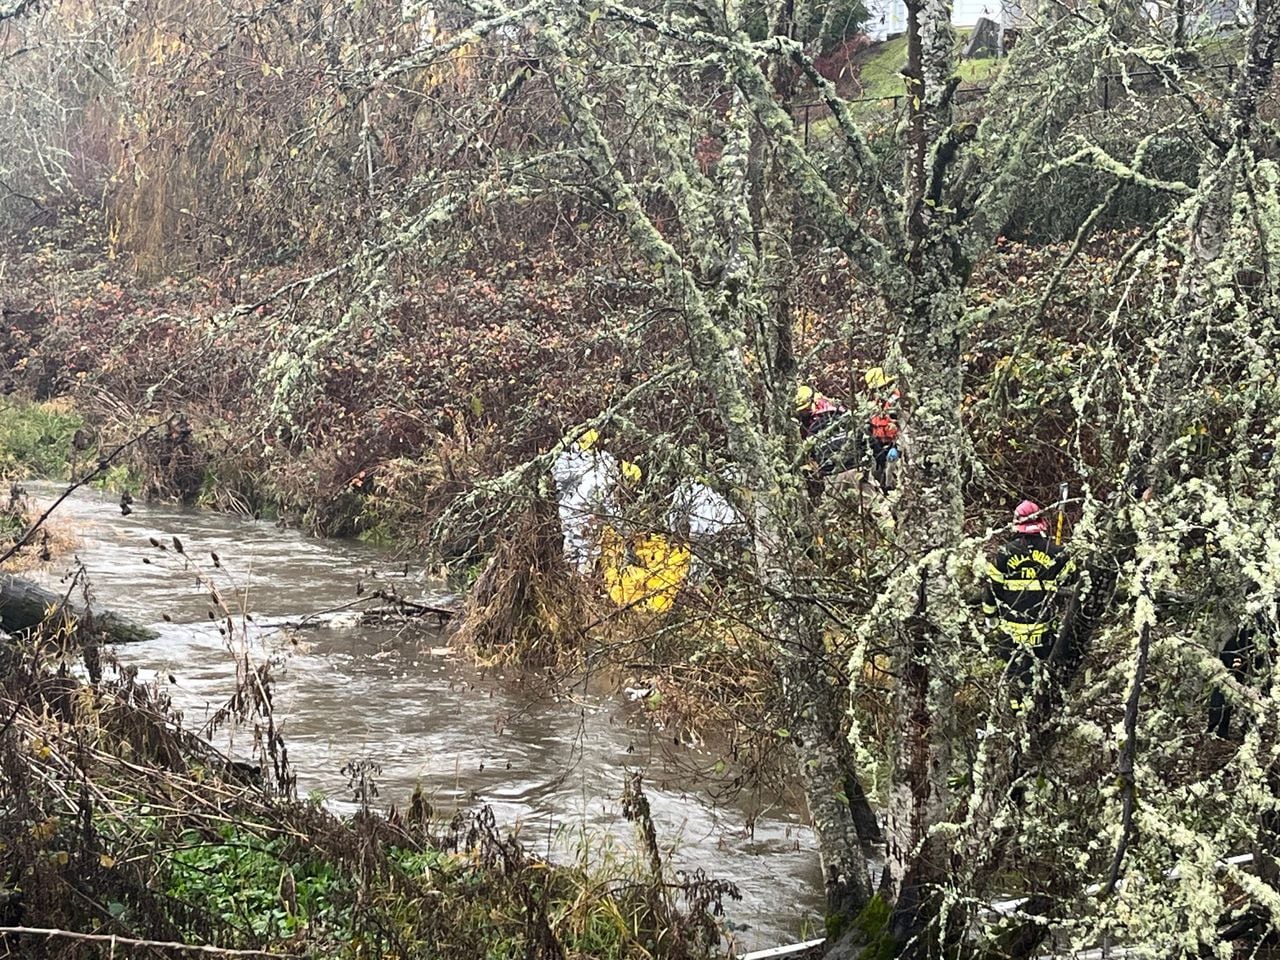 A photo shows a person in a white protective suit and firefighter in firefighting gear standing on a brush-covered slope next to Bronson Creek with what appears to be a yellow plastic tarp or bag.